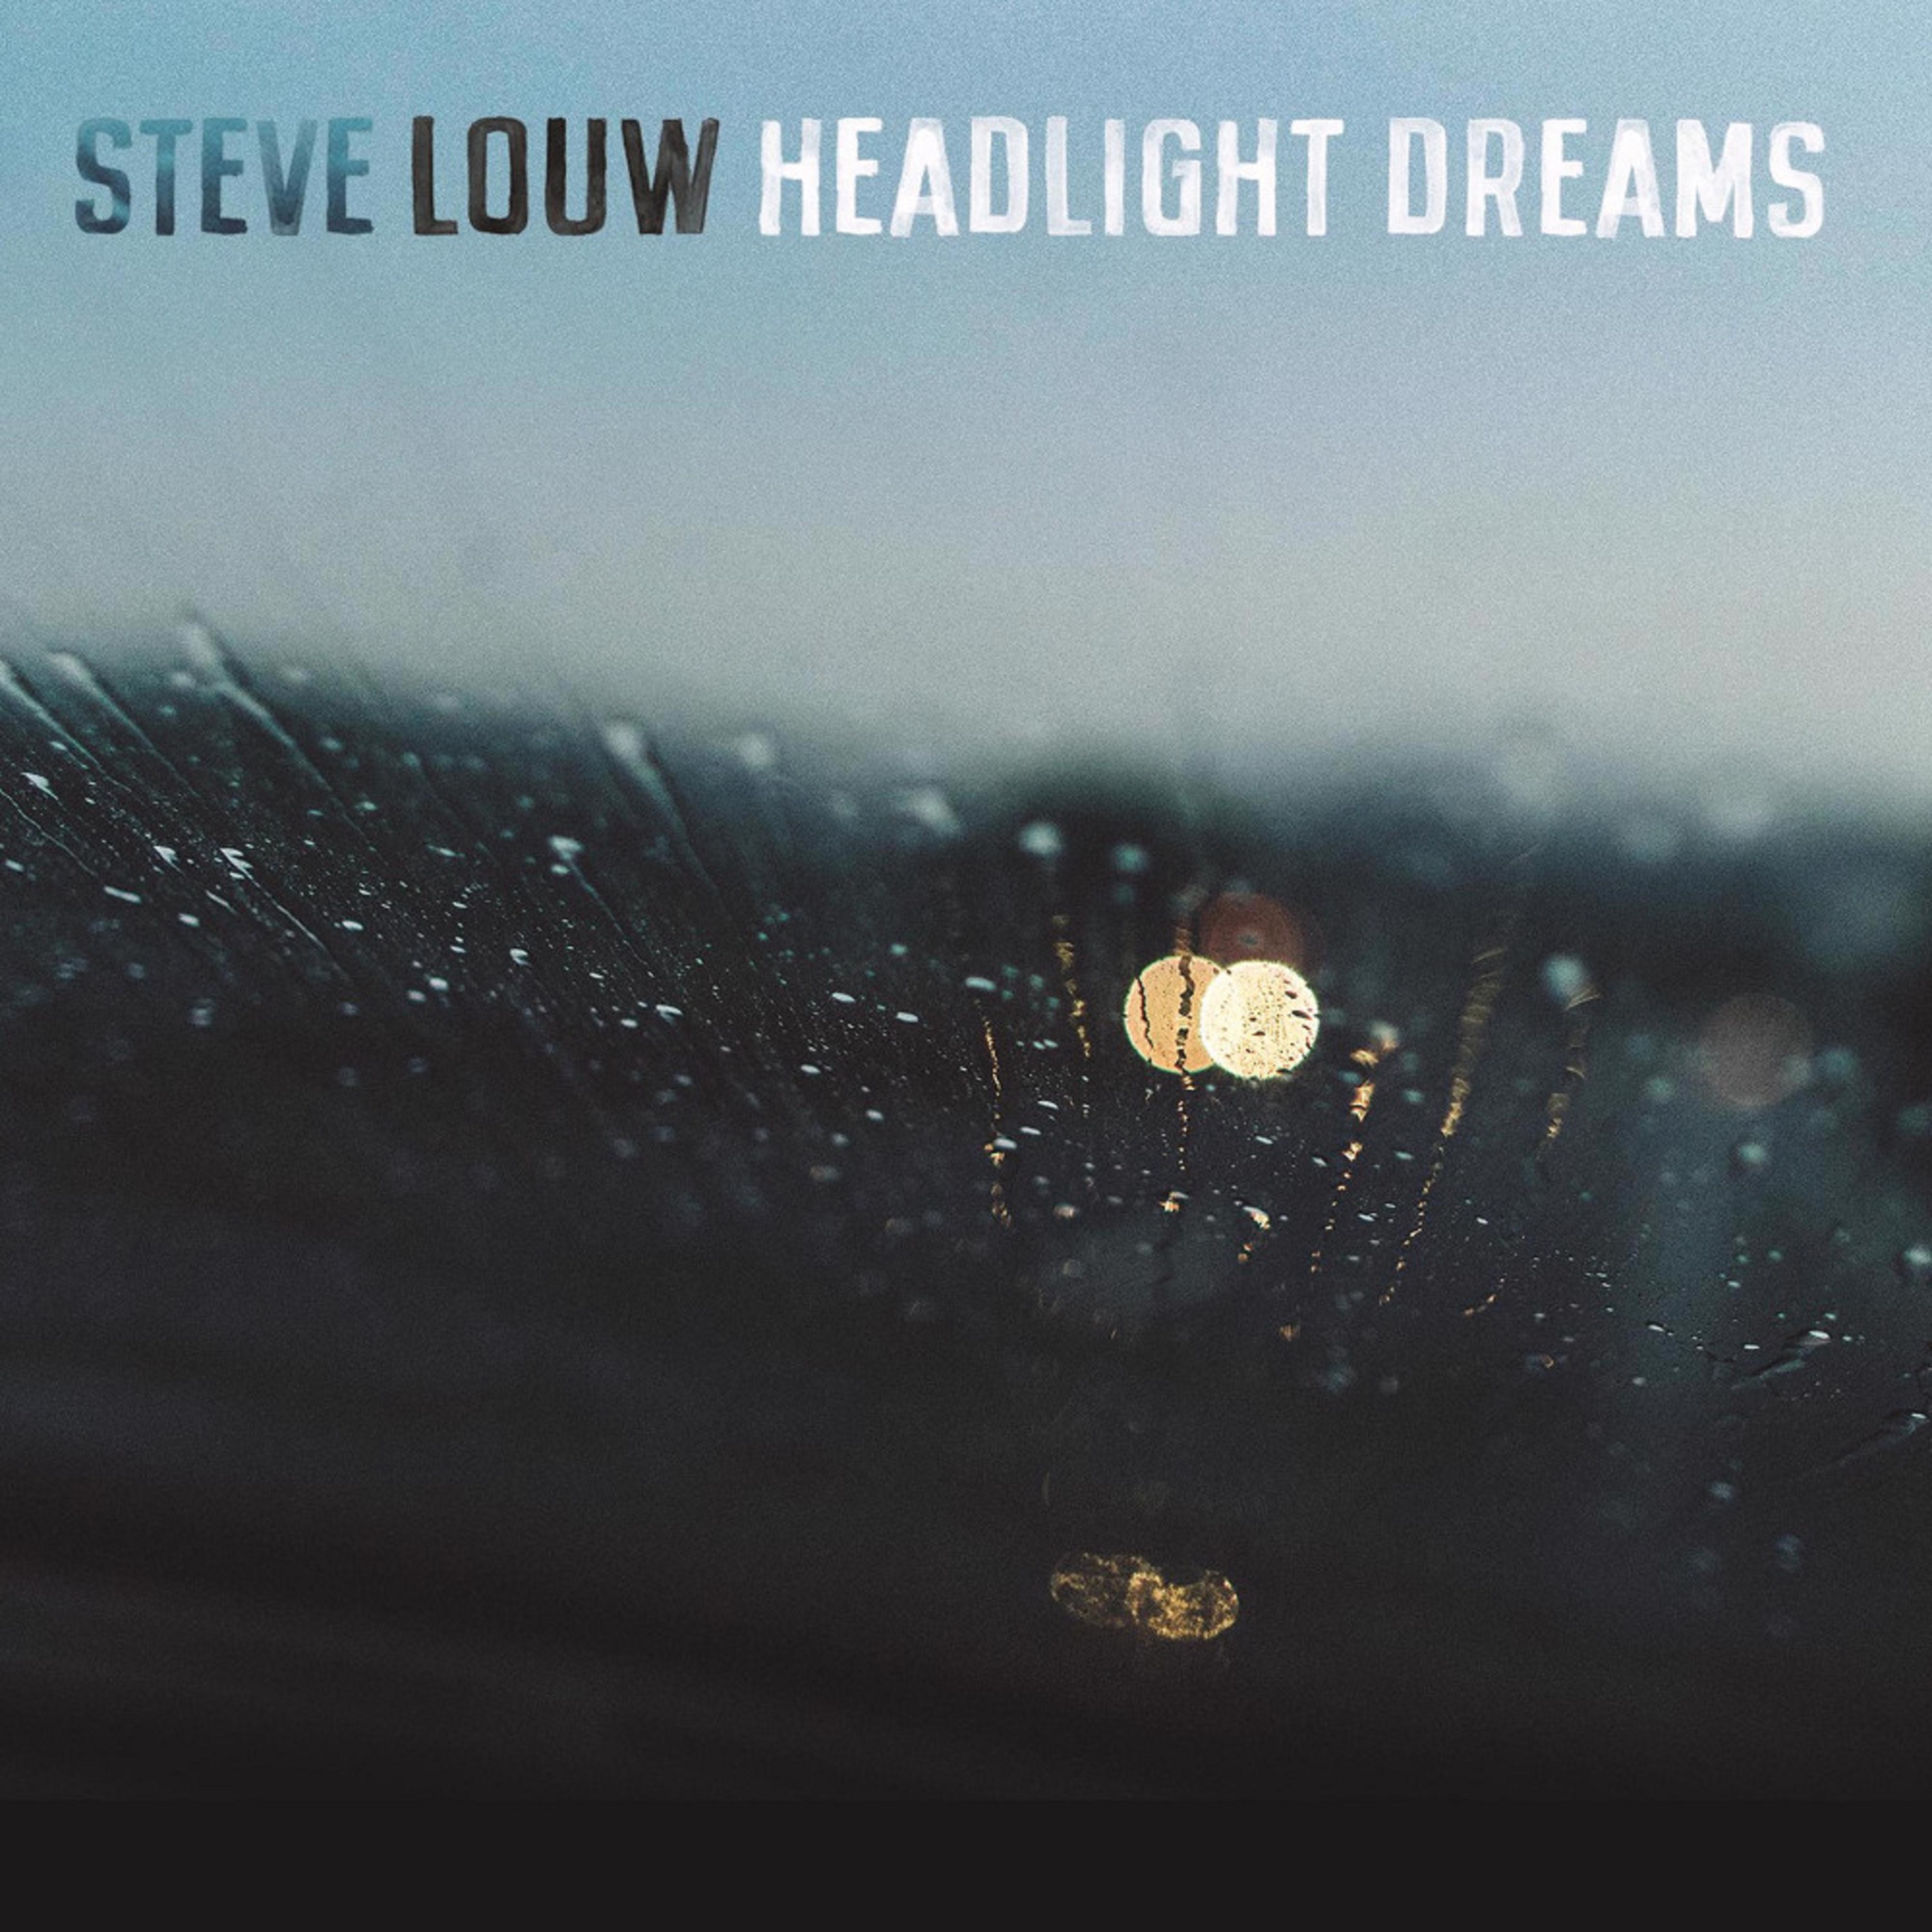 South African singer/songwriter Steve Louw - New Album "Headlight Dreams" out in May